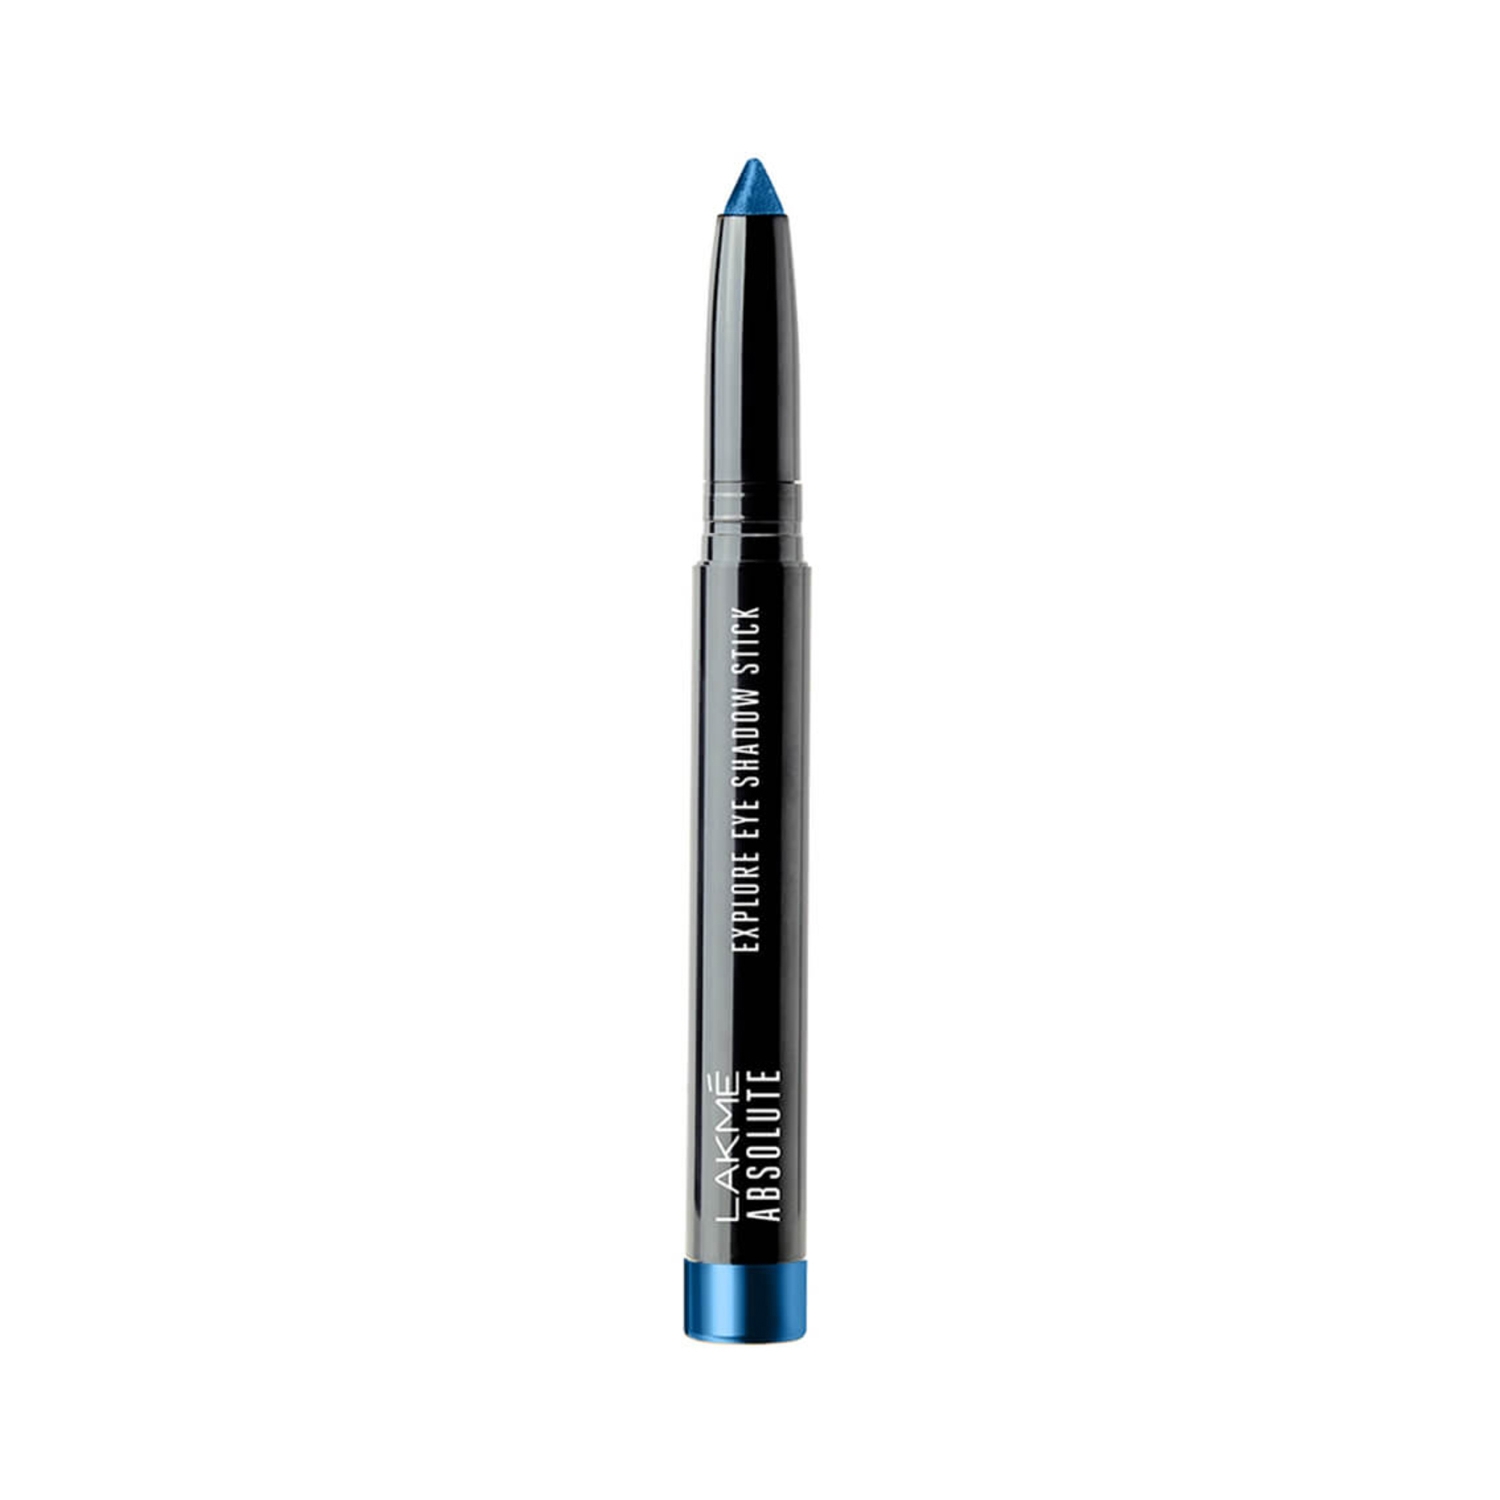 Lakme | Lakme Absolute Explore Eye Shadow Stick - Blue Orchid (1.4g)